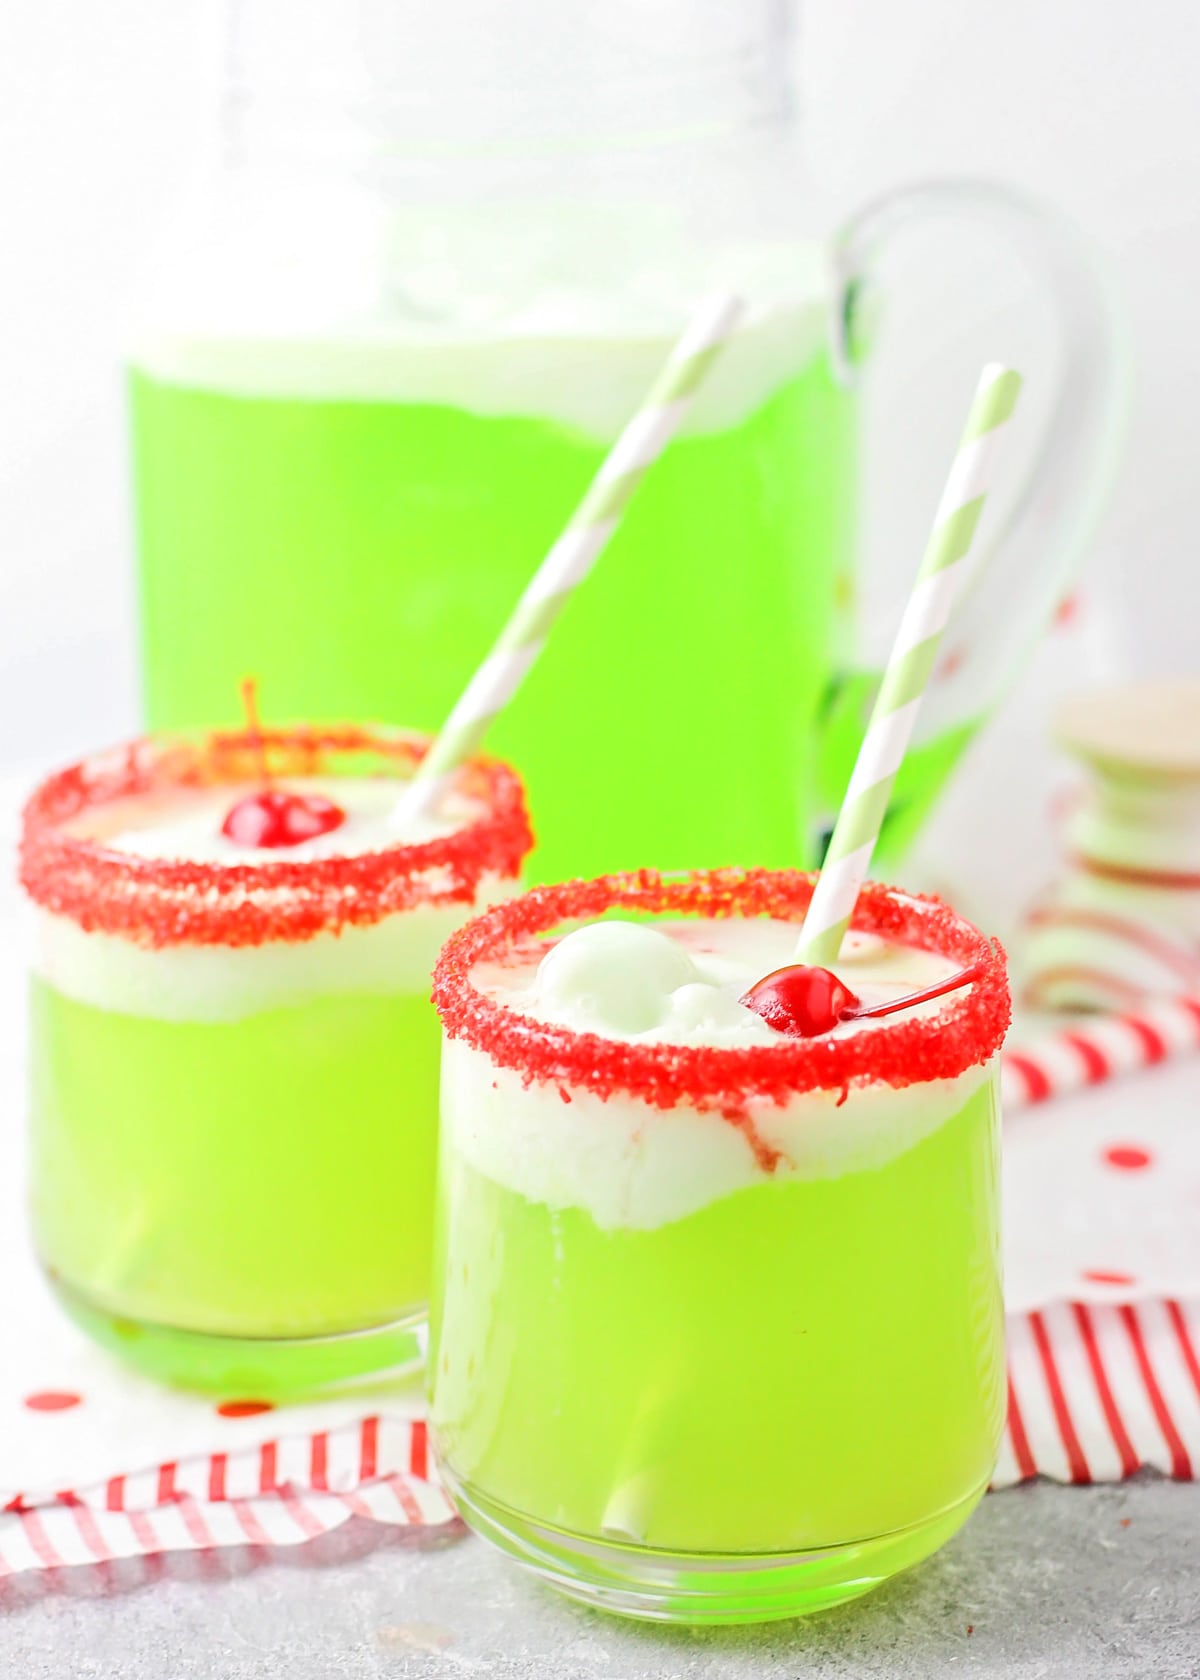 Two glasses of Grinch punch rimmed with red sugar and topped with cherries.